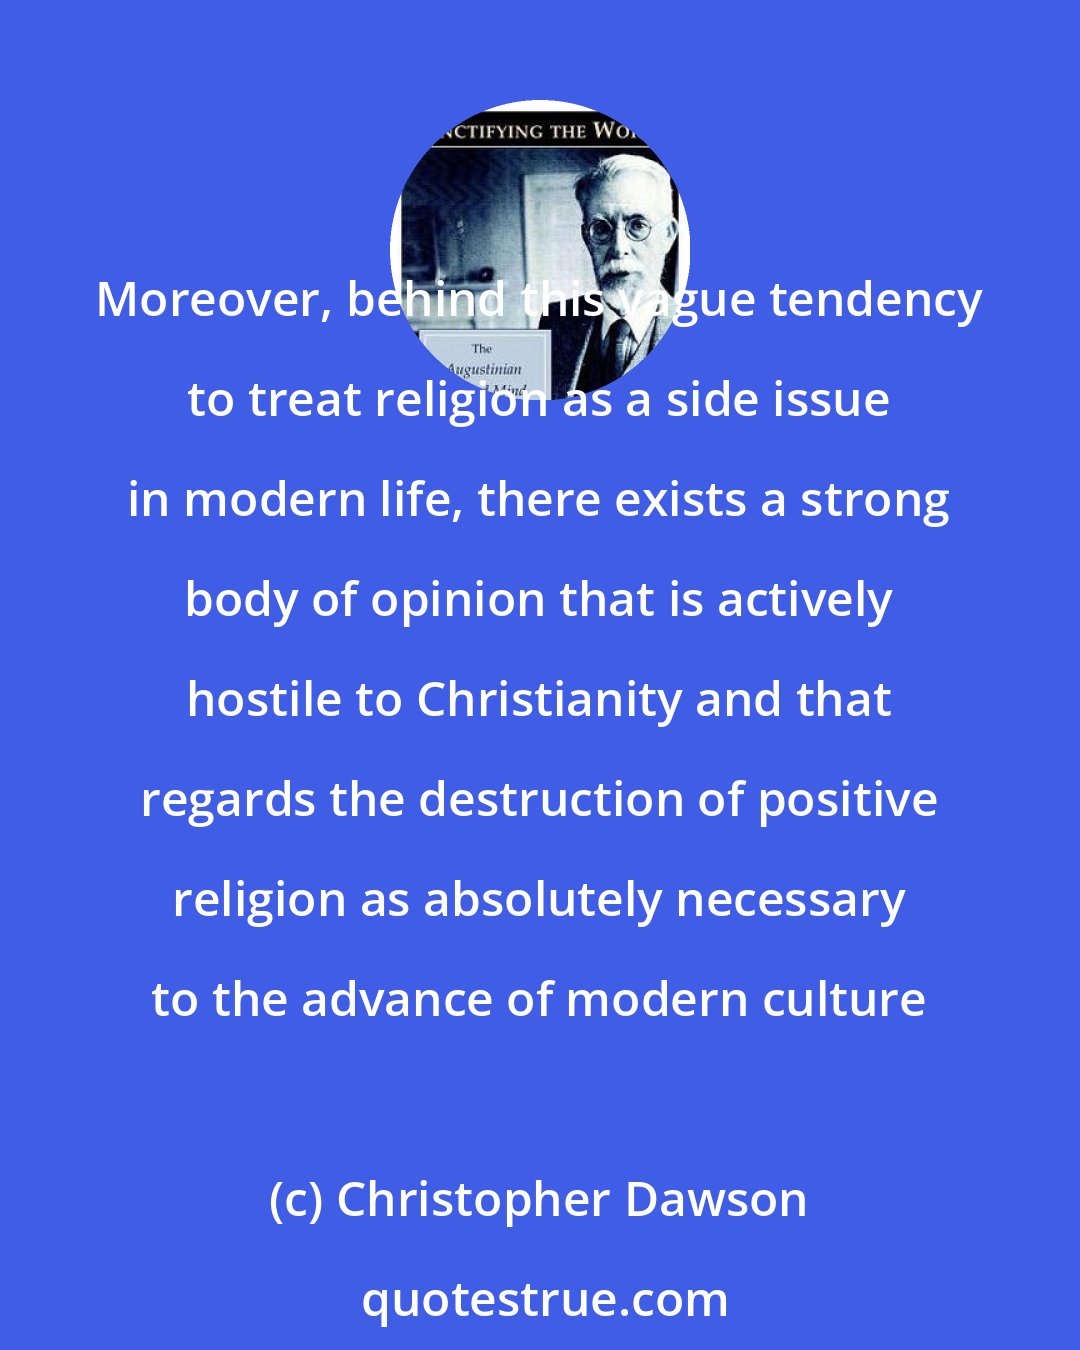 Christopher Dawson: Moreover, behind this vague tendency to treat religion as a side issue in modern life, there exists a strong body of opinion that is actively hostile to Christianity and that regards the destruction of positive religion as absolutely necessary to the advance of modern culture